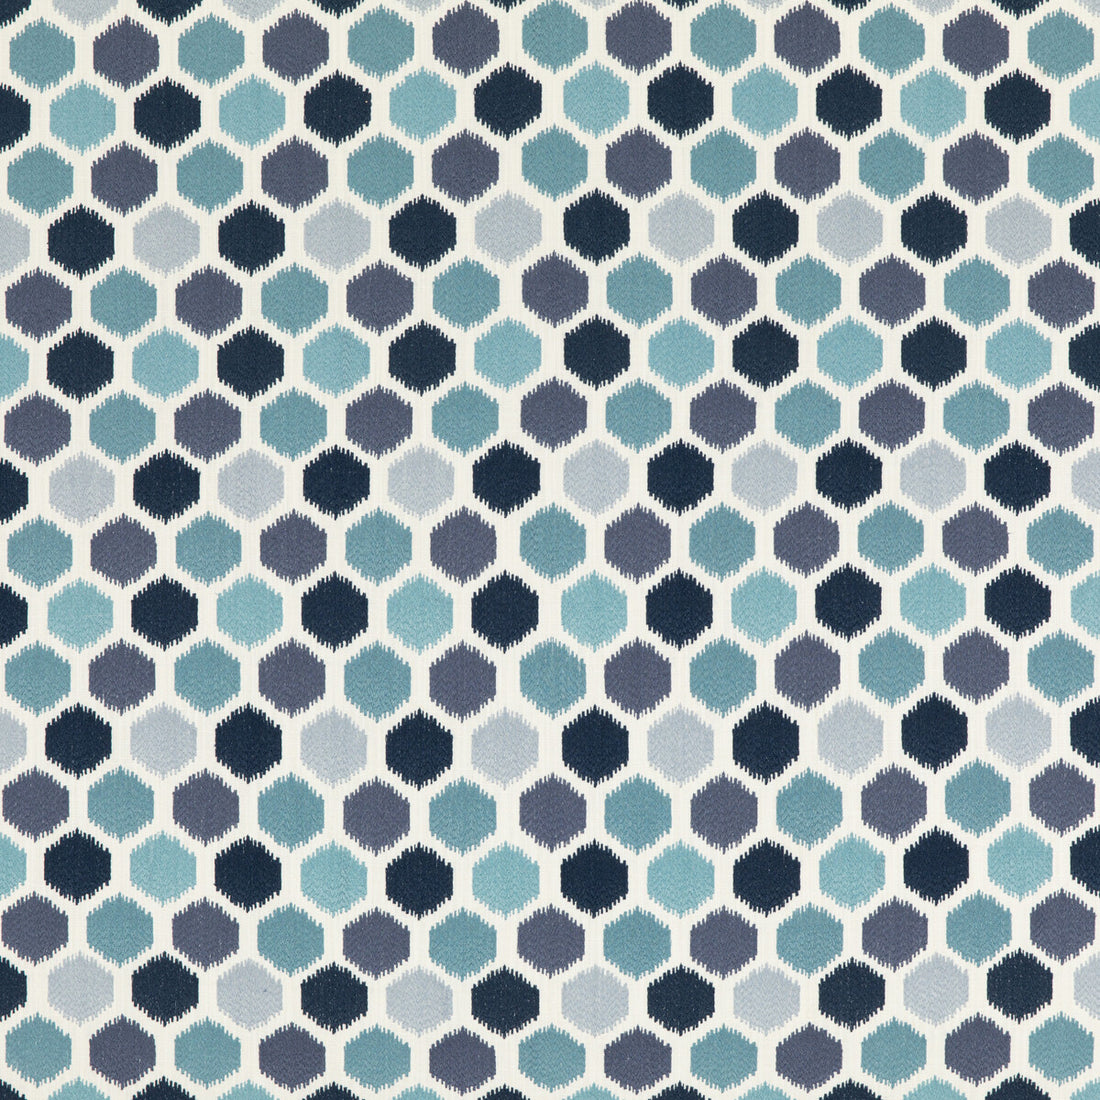 Pinata fabric in indigo color - pattern PF50470.2.0 - by Baker Lifestyle in the Fiesta collection